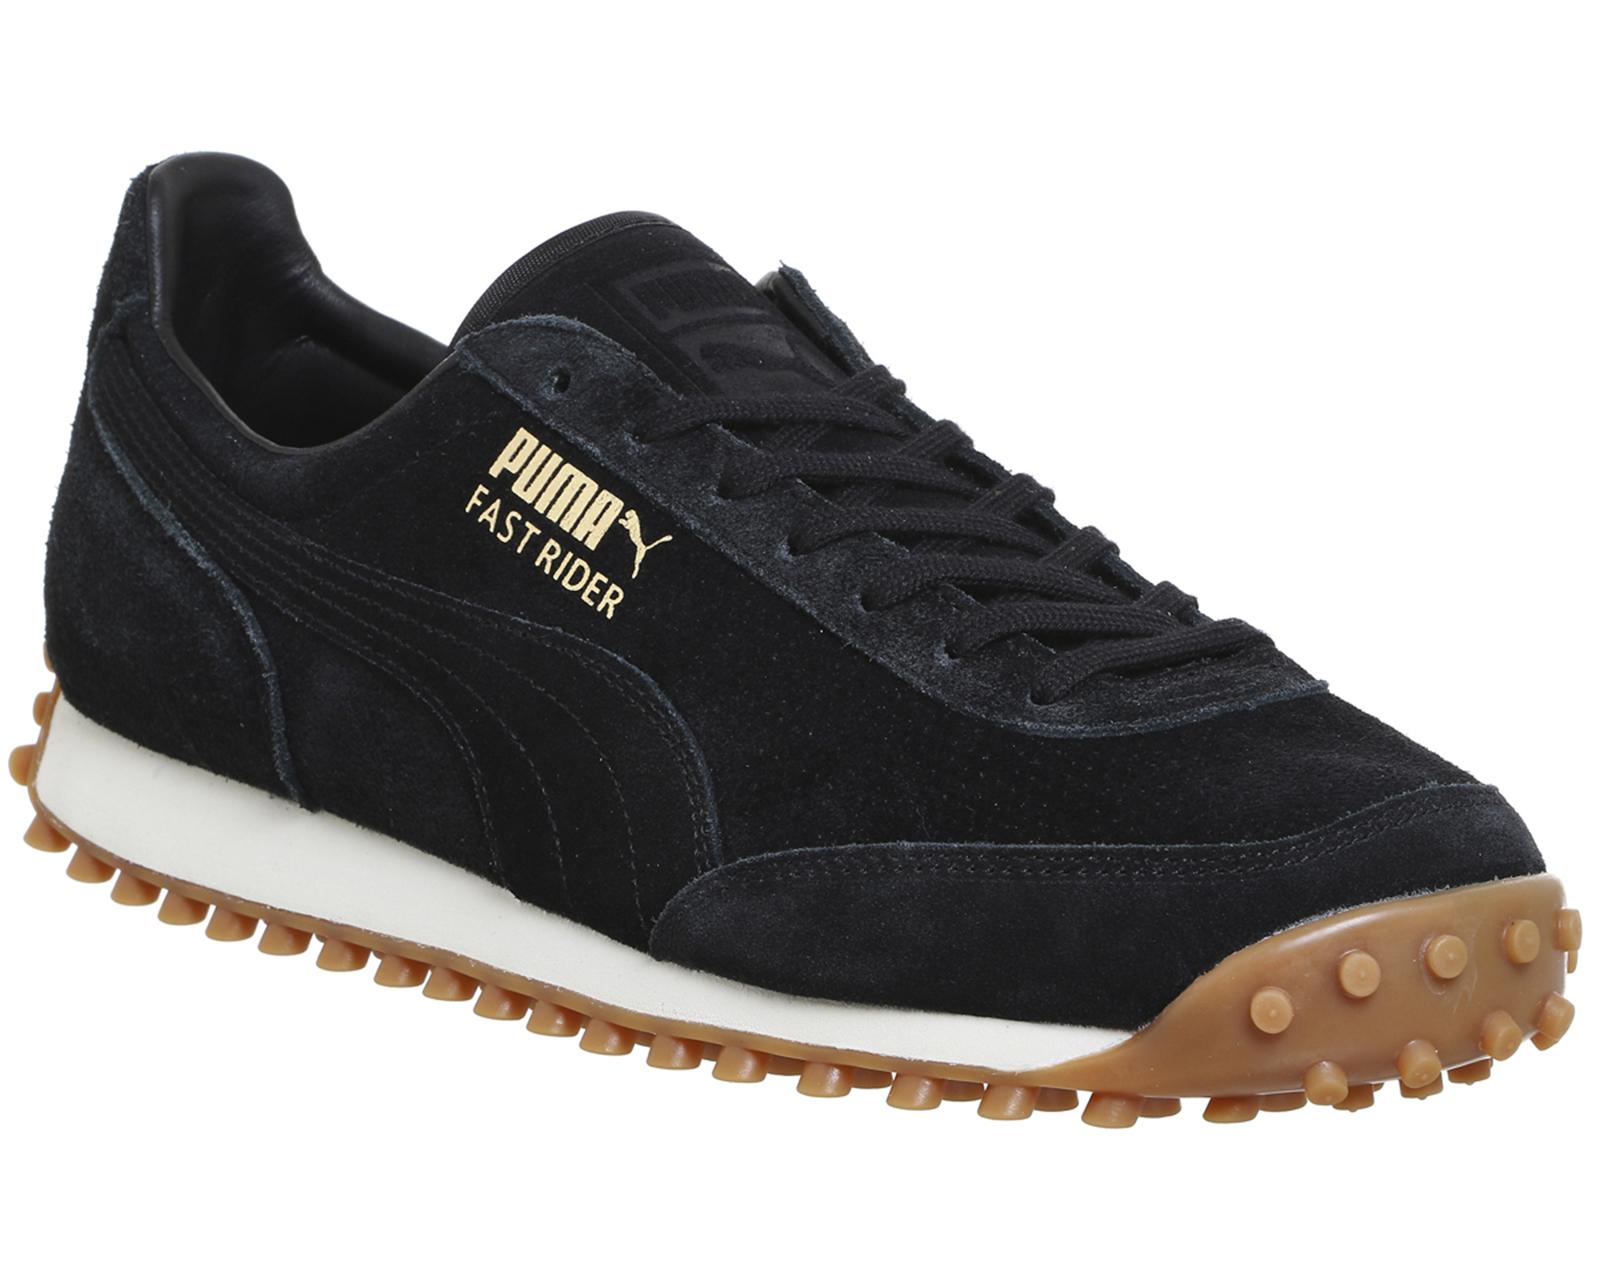 PUMA Suede Fast Rider Trainers in Black for Men - Lyst